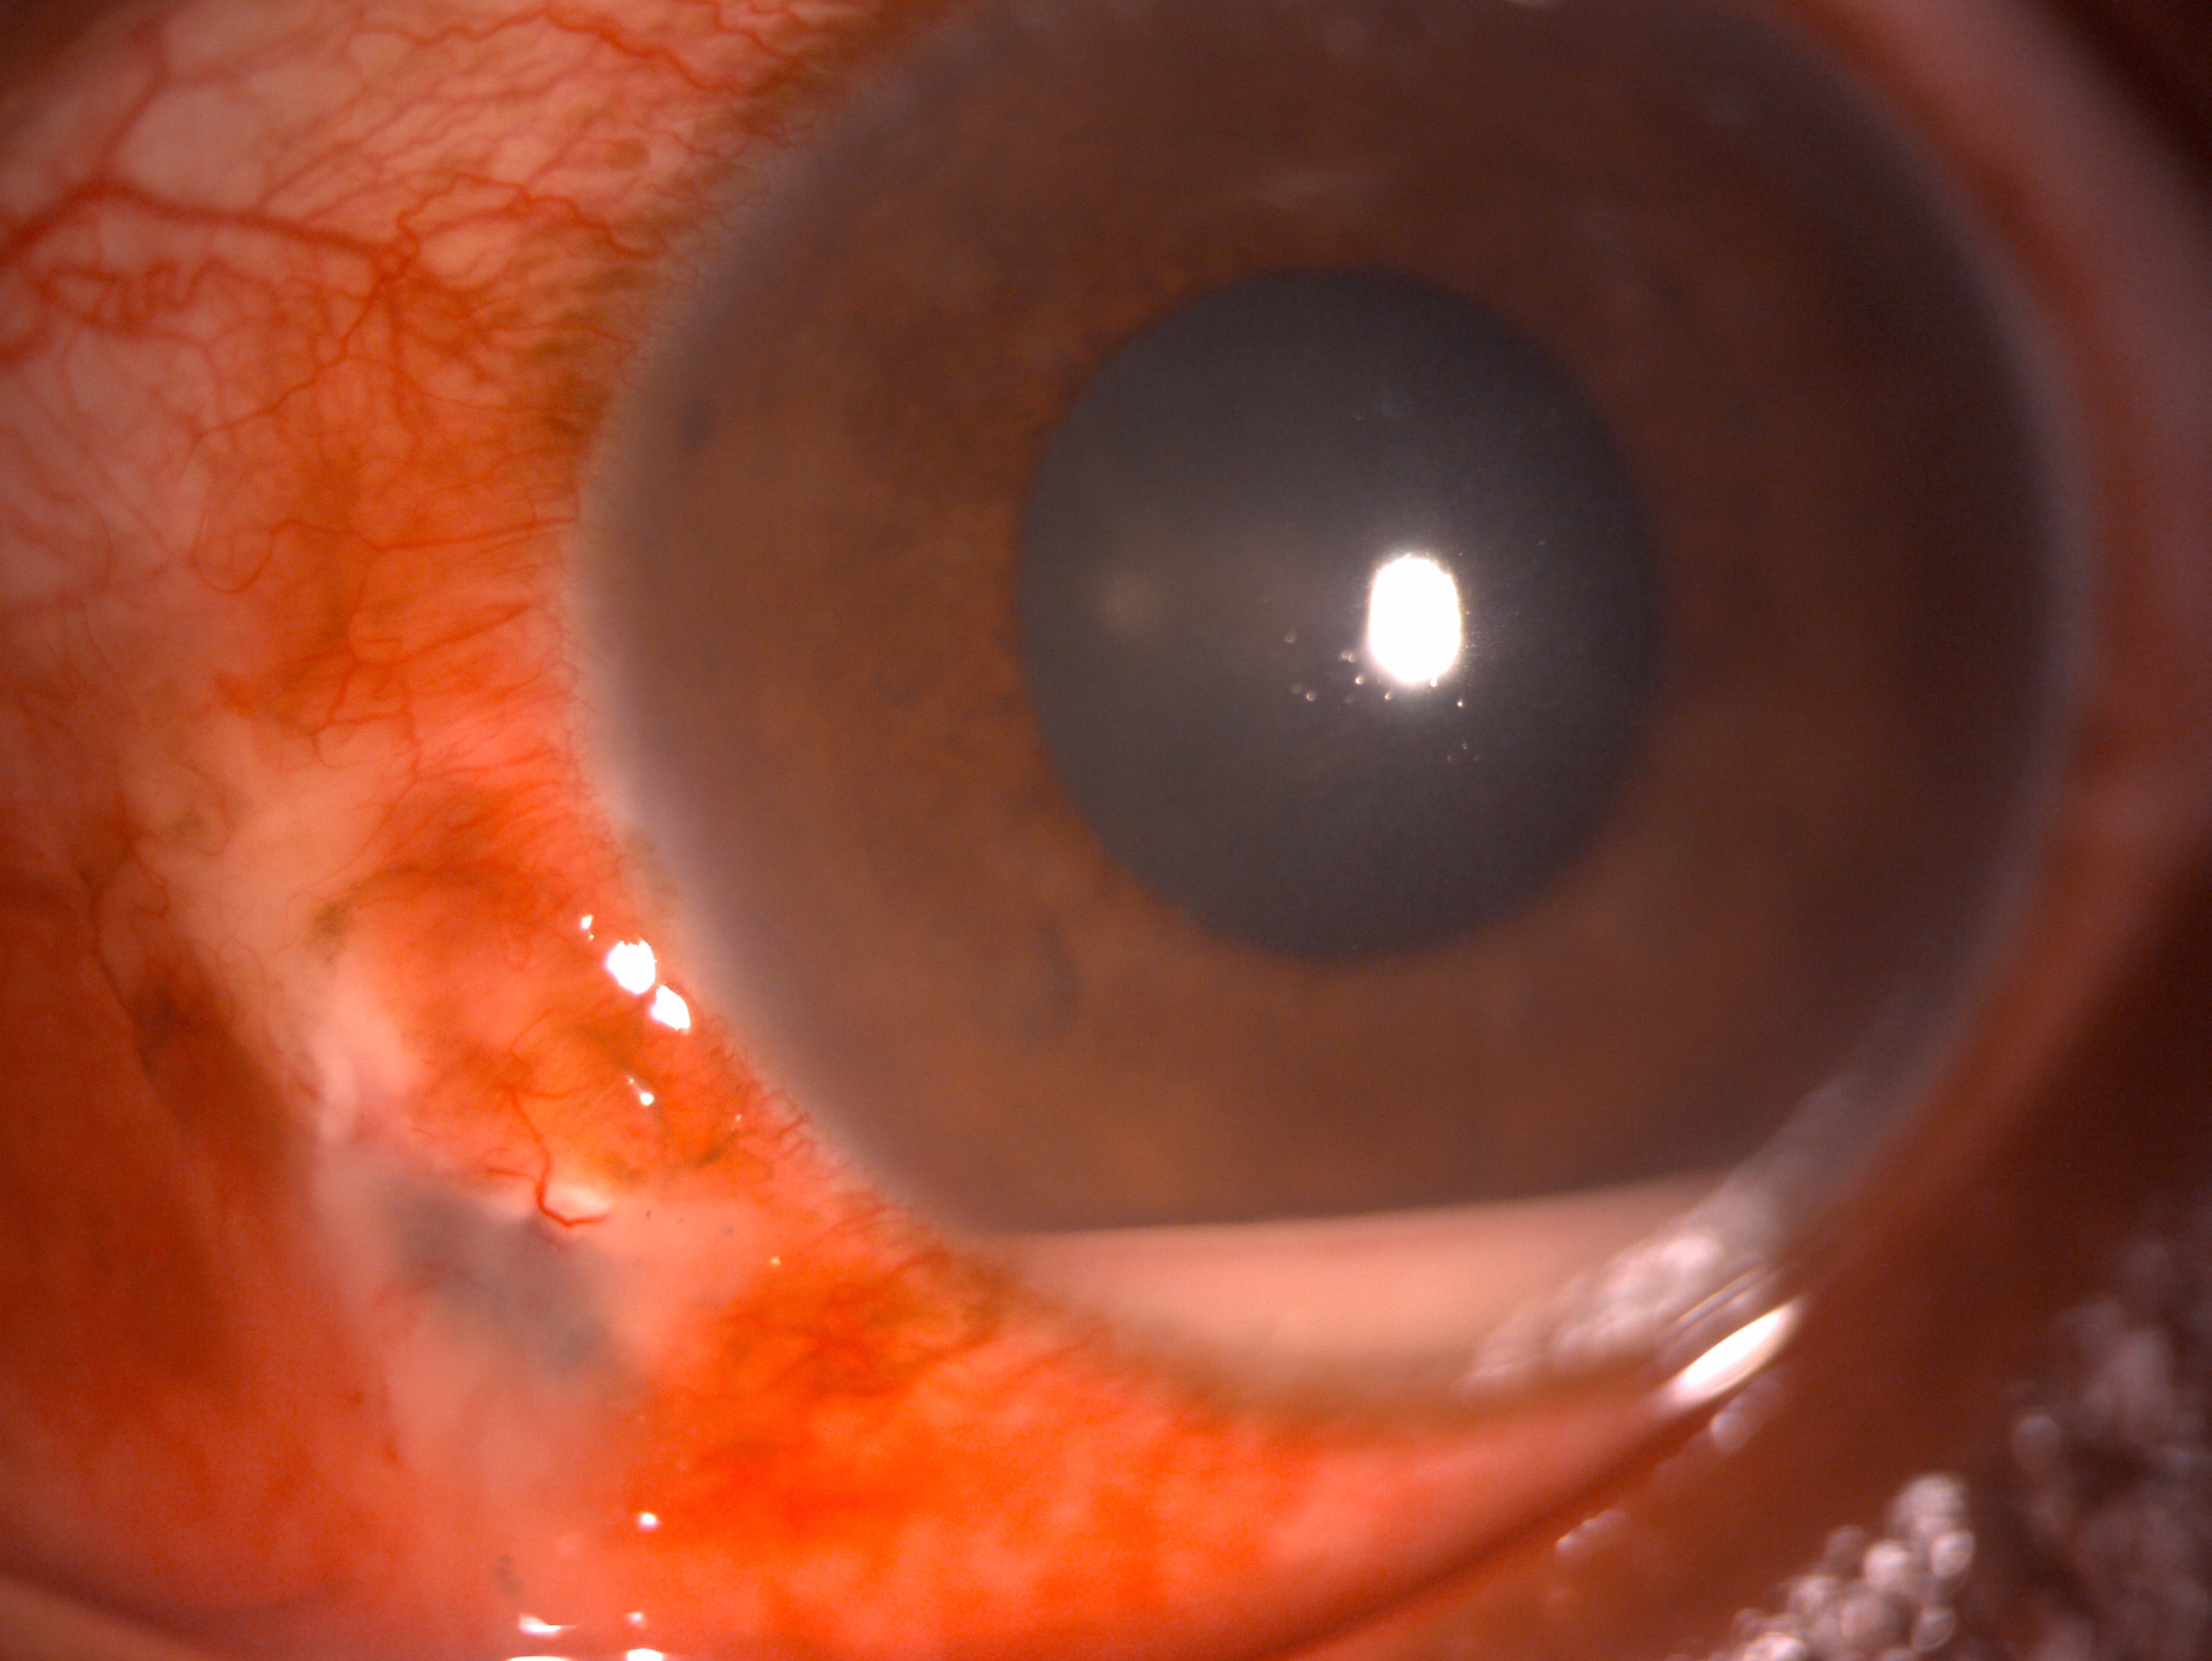 Digital slit lamp image of the patient depicting diffuse conjunctival congestion, inferotemporal scleral tear, 2 mm hypopyon and rest of the details are normal